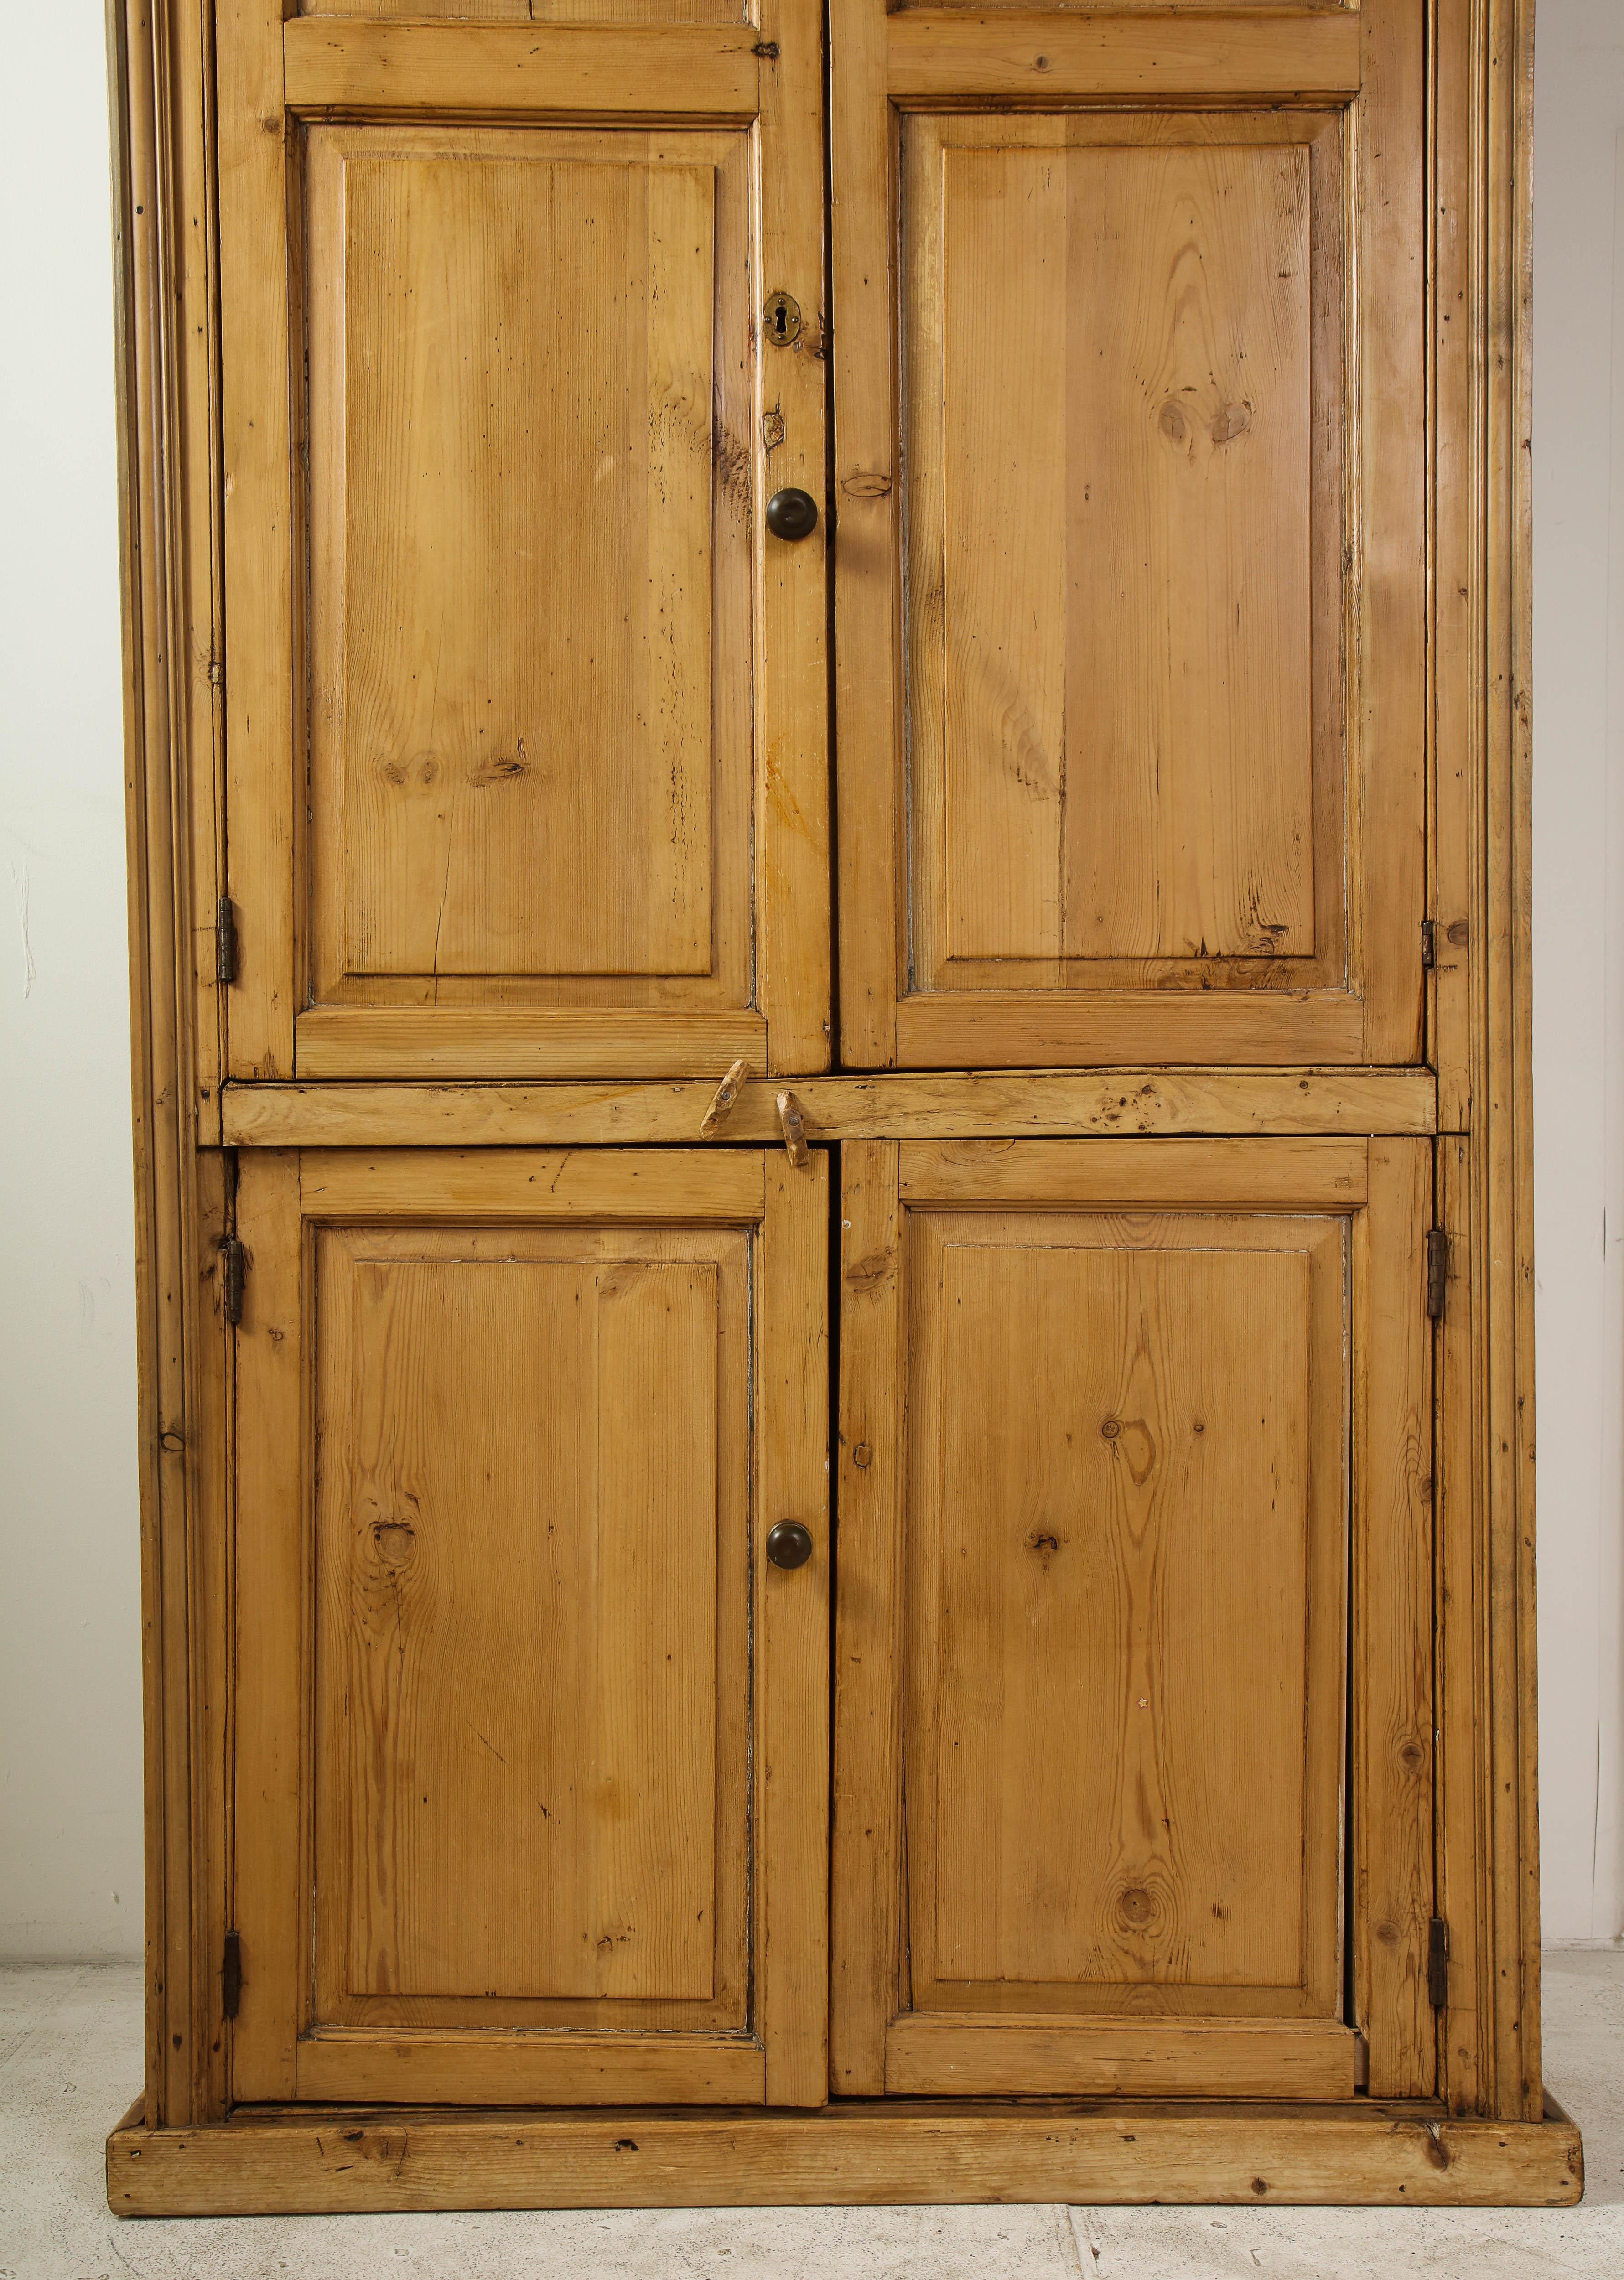 19th century English country pine bookcase with original hardware. One shelf in upper portion. Doors close easily.